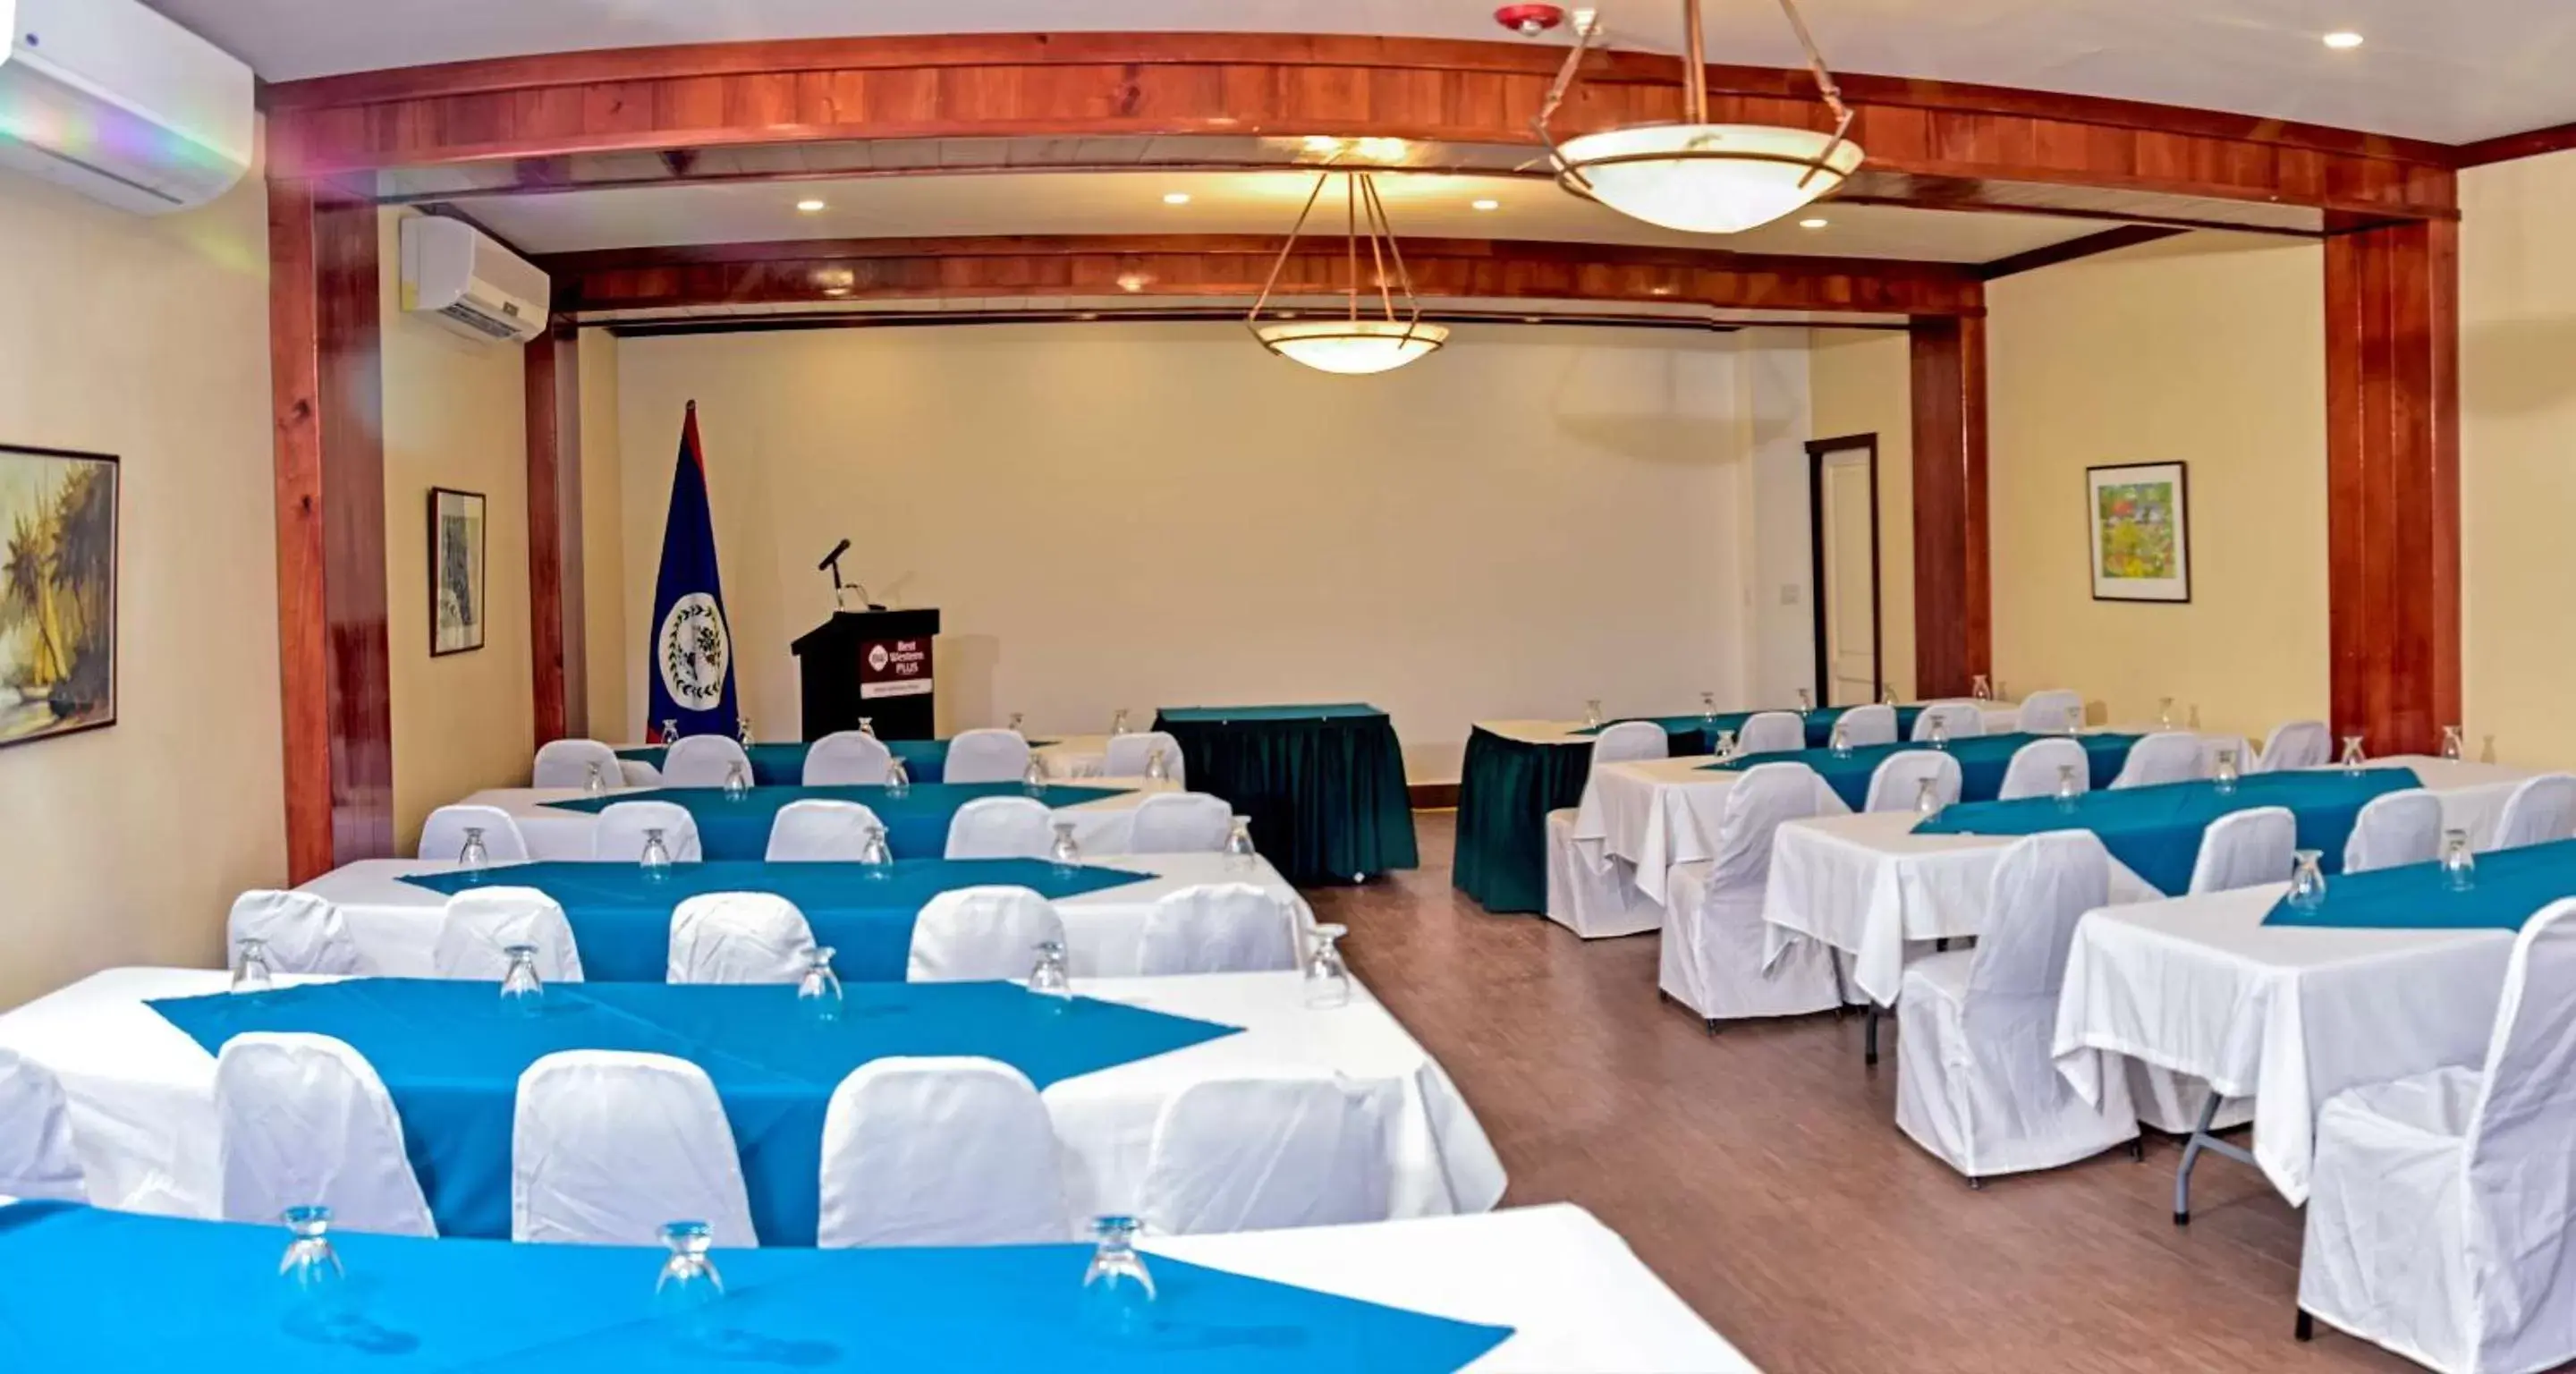 On site, Banquet Facilities in Best Western Plus Belize Biltmore Plaza